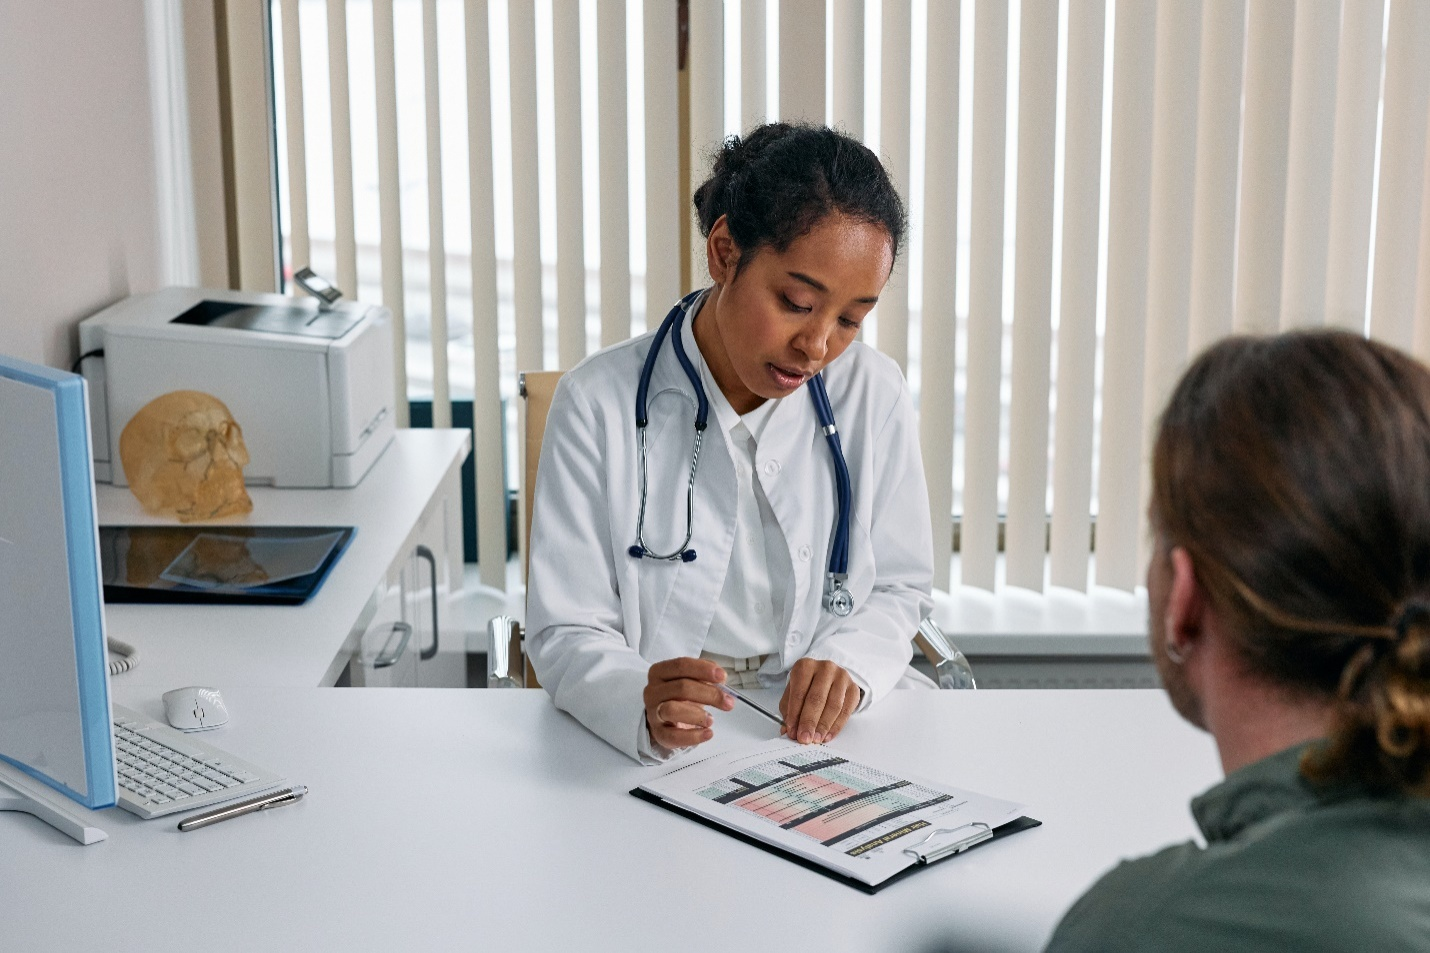 A doctor discussing a report with her patient